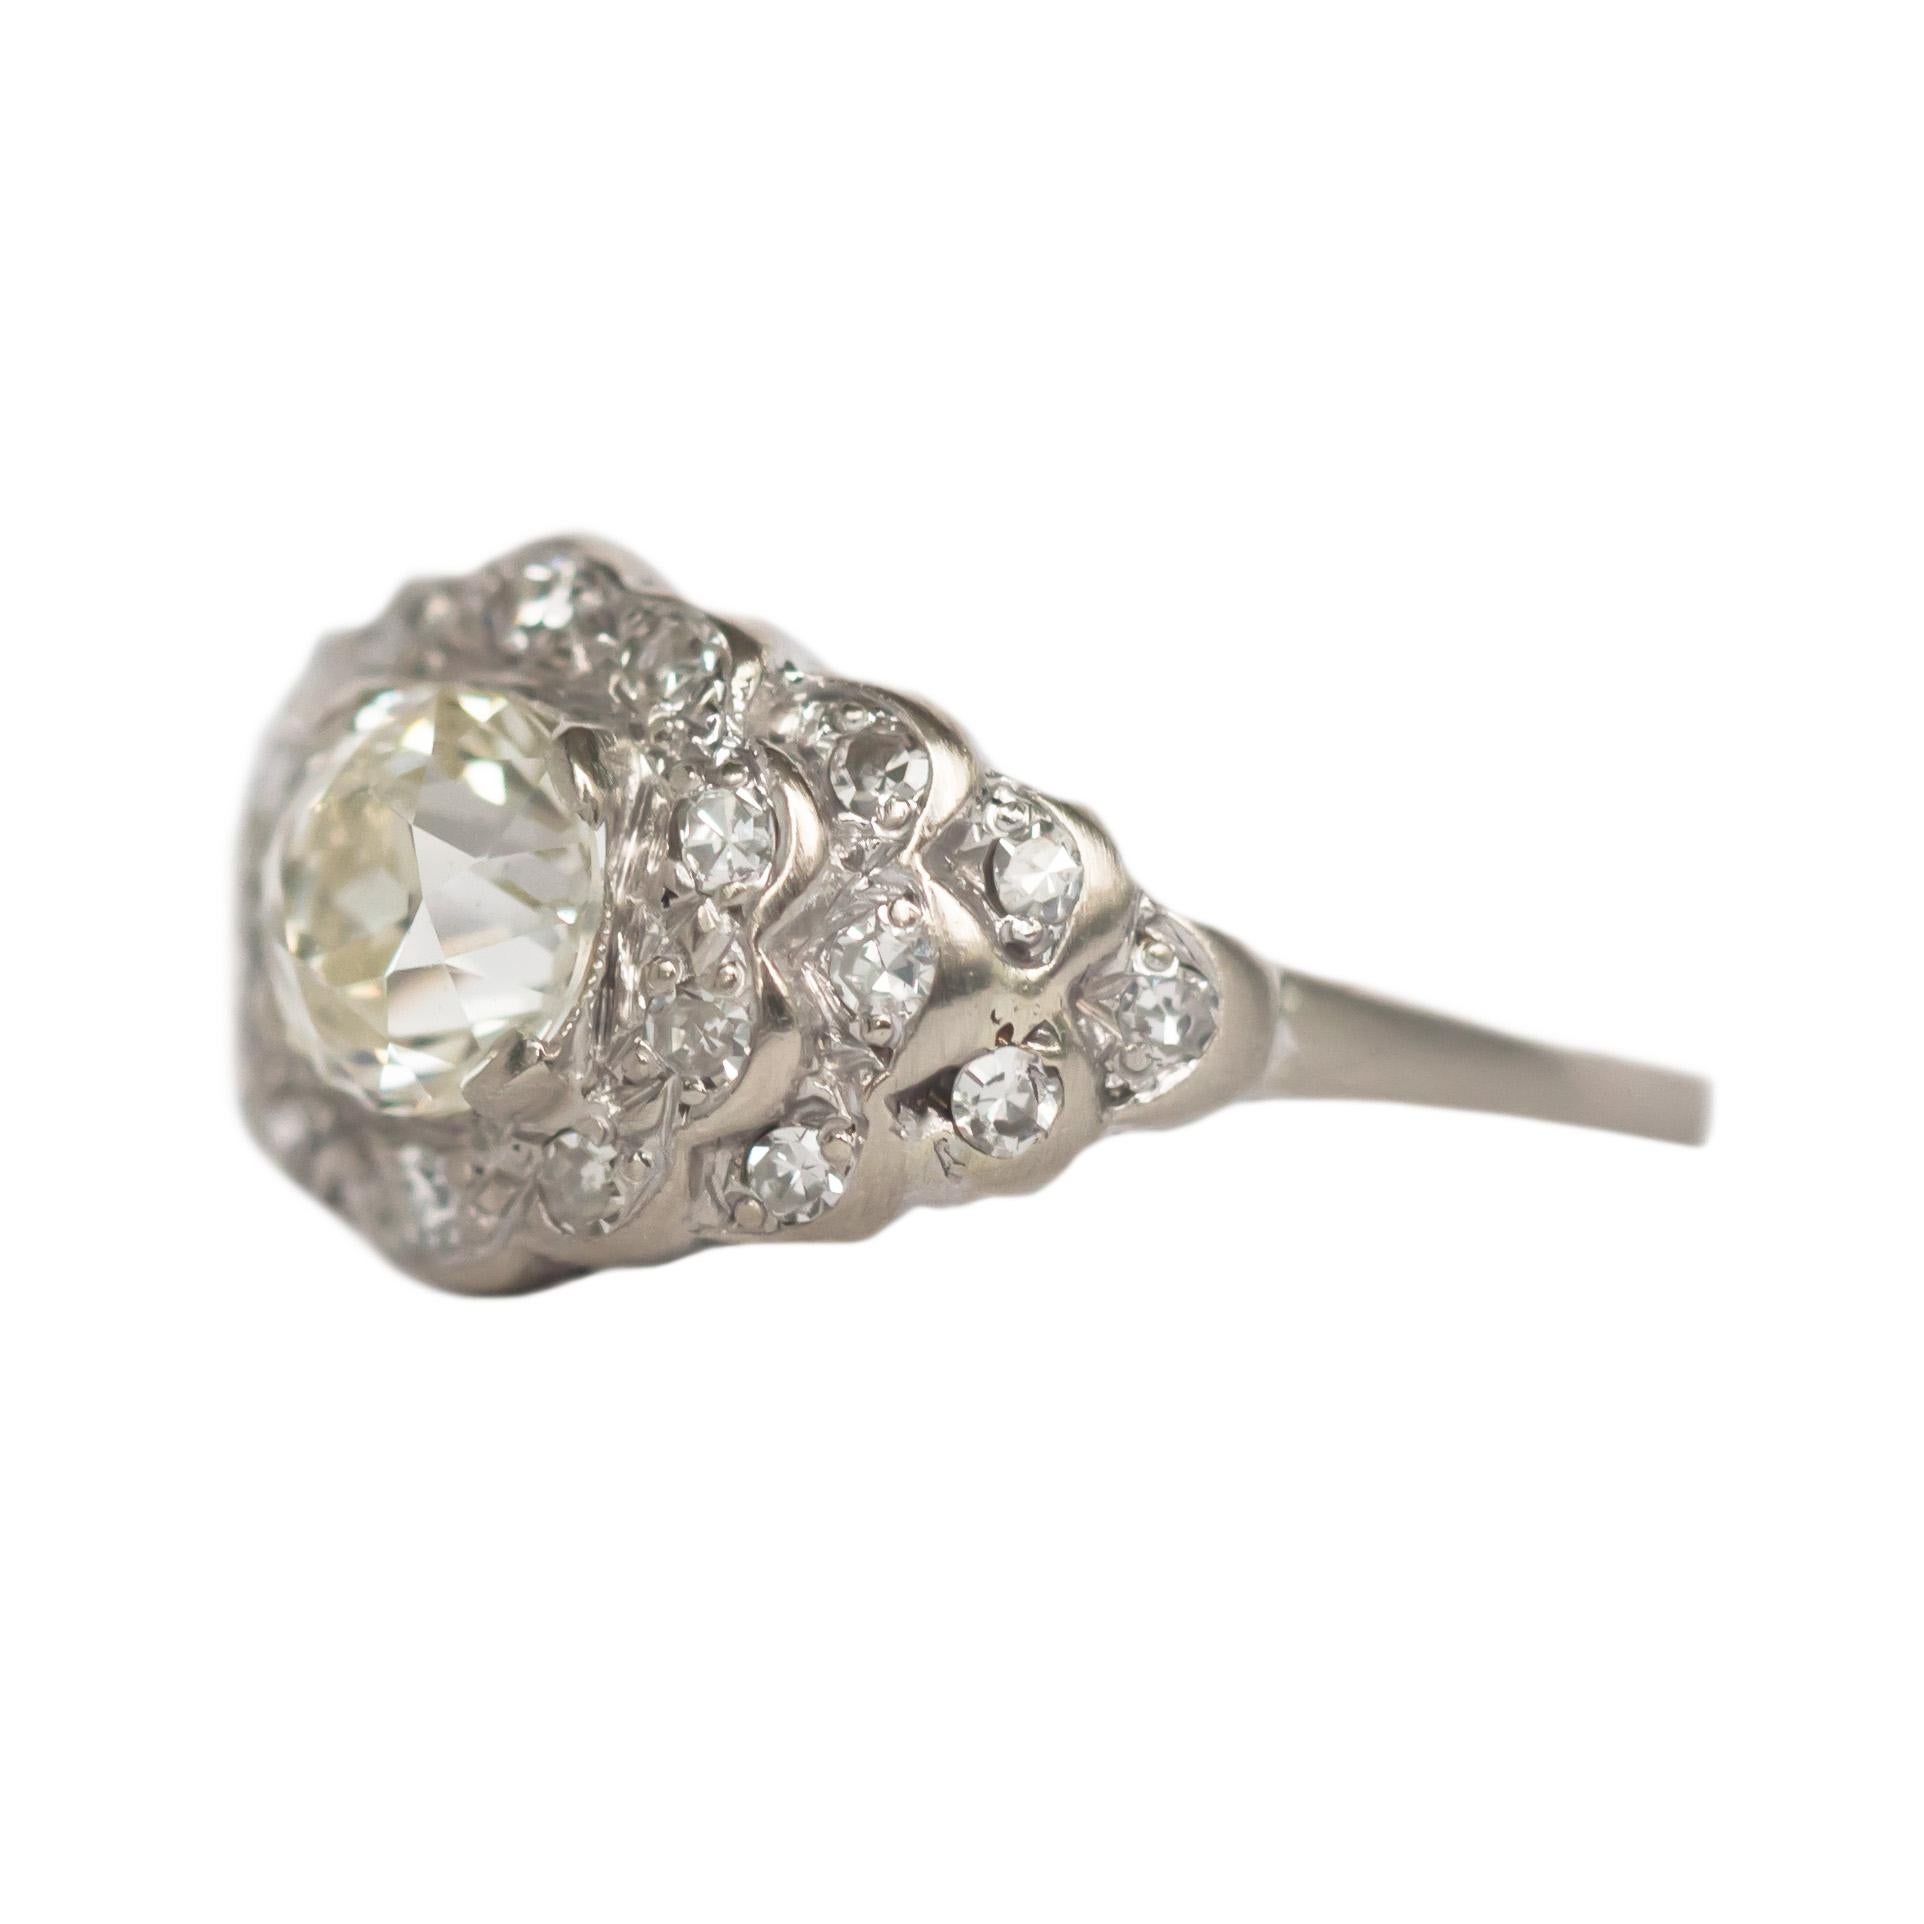 Ring Size: 5.75
Metal Type: Platinum Head and 14 karat Gold Shank [Hallmarked, and Tested]
Weight:  3.4 grams

Center Diamond Details:
GIA REPORT #2205761672
Weight: .83 carat
Cut: Old European Brilliant
Color: L
Clarity: VVS2

Side Diamond